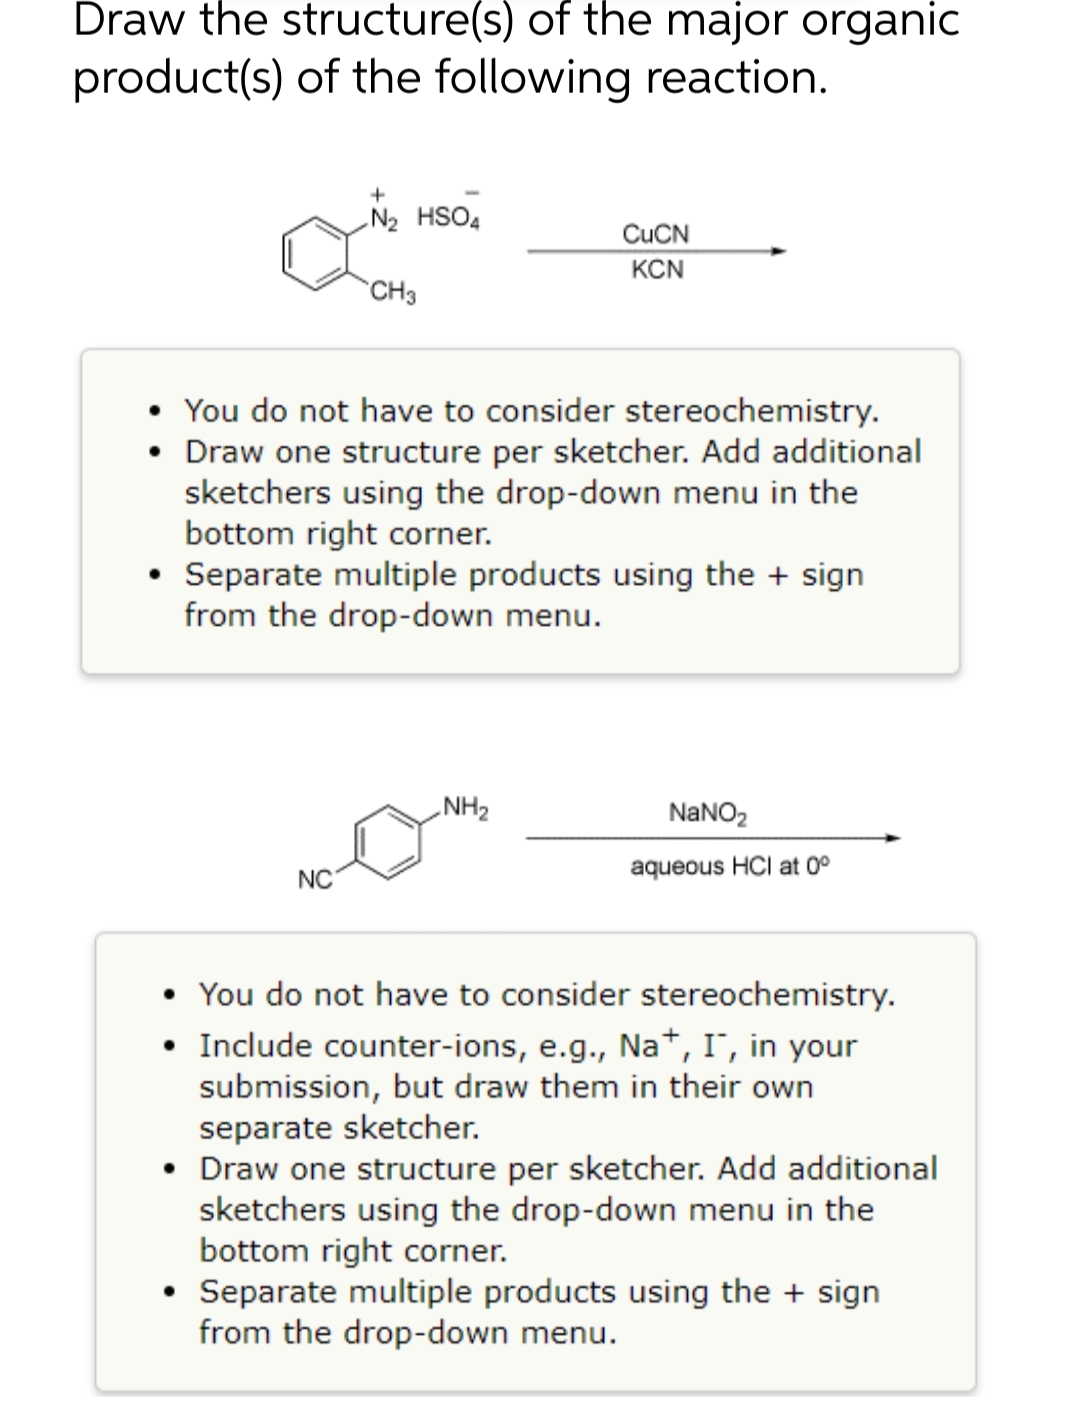 Draw the structure(s) of the major organic
product(s) of the following reaction.
+
N₂ HSO4
CuCN
KCN
CH3
• You do not have to consider stereochemistry.
• Draw one structure per sketcher. Add additional
sketchers using the drop-down menu in the
bottom right corner.
• Separate multiple products using the + sign
from the drop-down menu.
NH₂
NaNO₂
NC
aqueous HCI at 0°
• You do not have to consider stereochemistry.
• Include counter-ions, e.g., Na+, I, in your
submission, but draw them in their own
separate sketcher.
• Draw one structure per sketcher. Add additional
sketchers using the drop-down menu in the
bottom right corner.
• Separate multiple products using the + sign
from the drop-down menu.